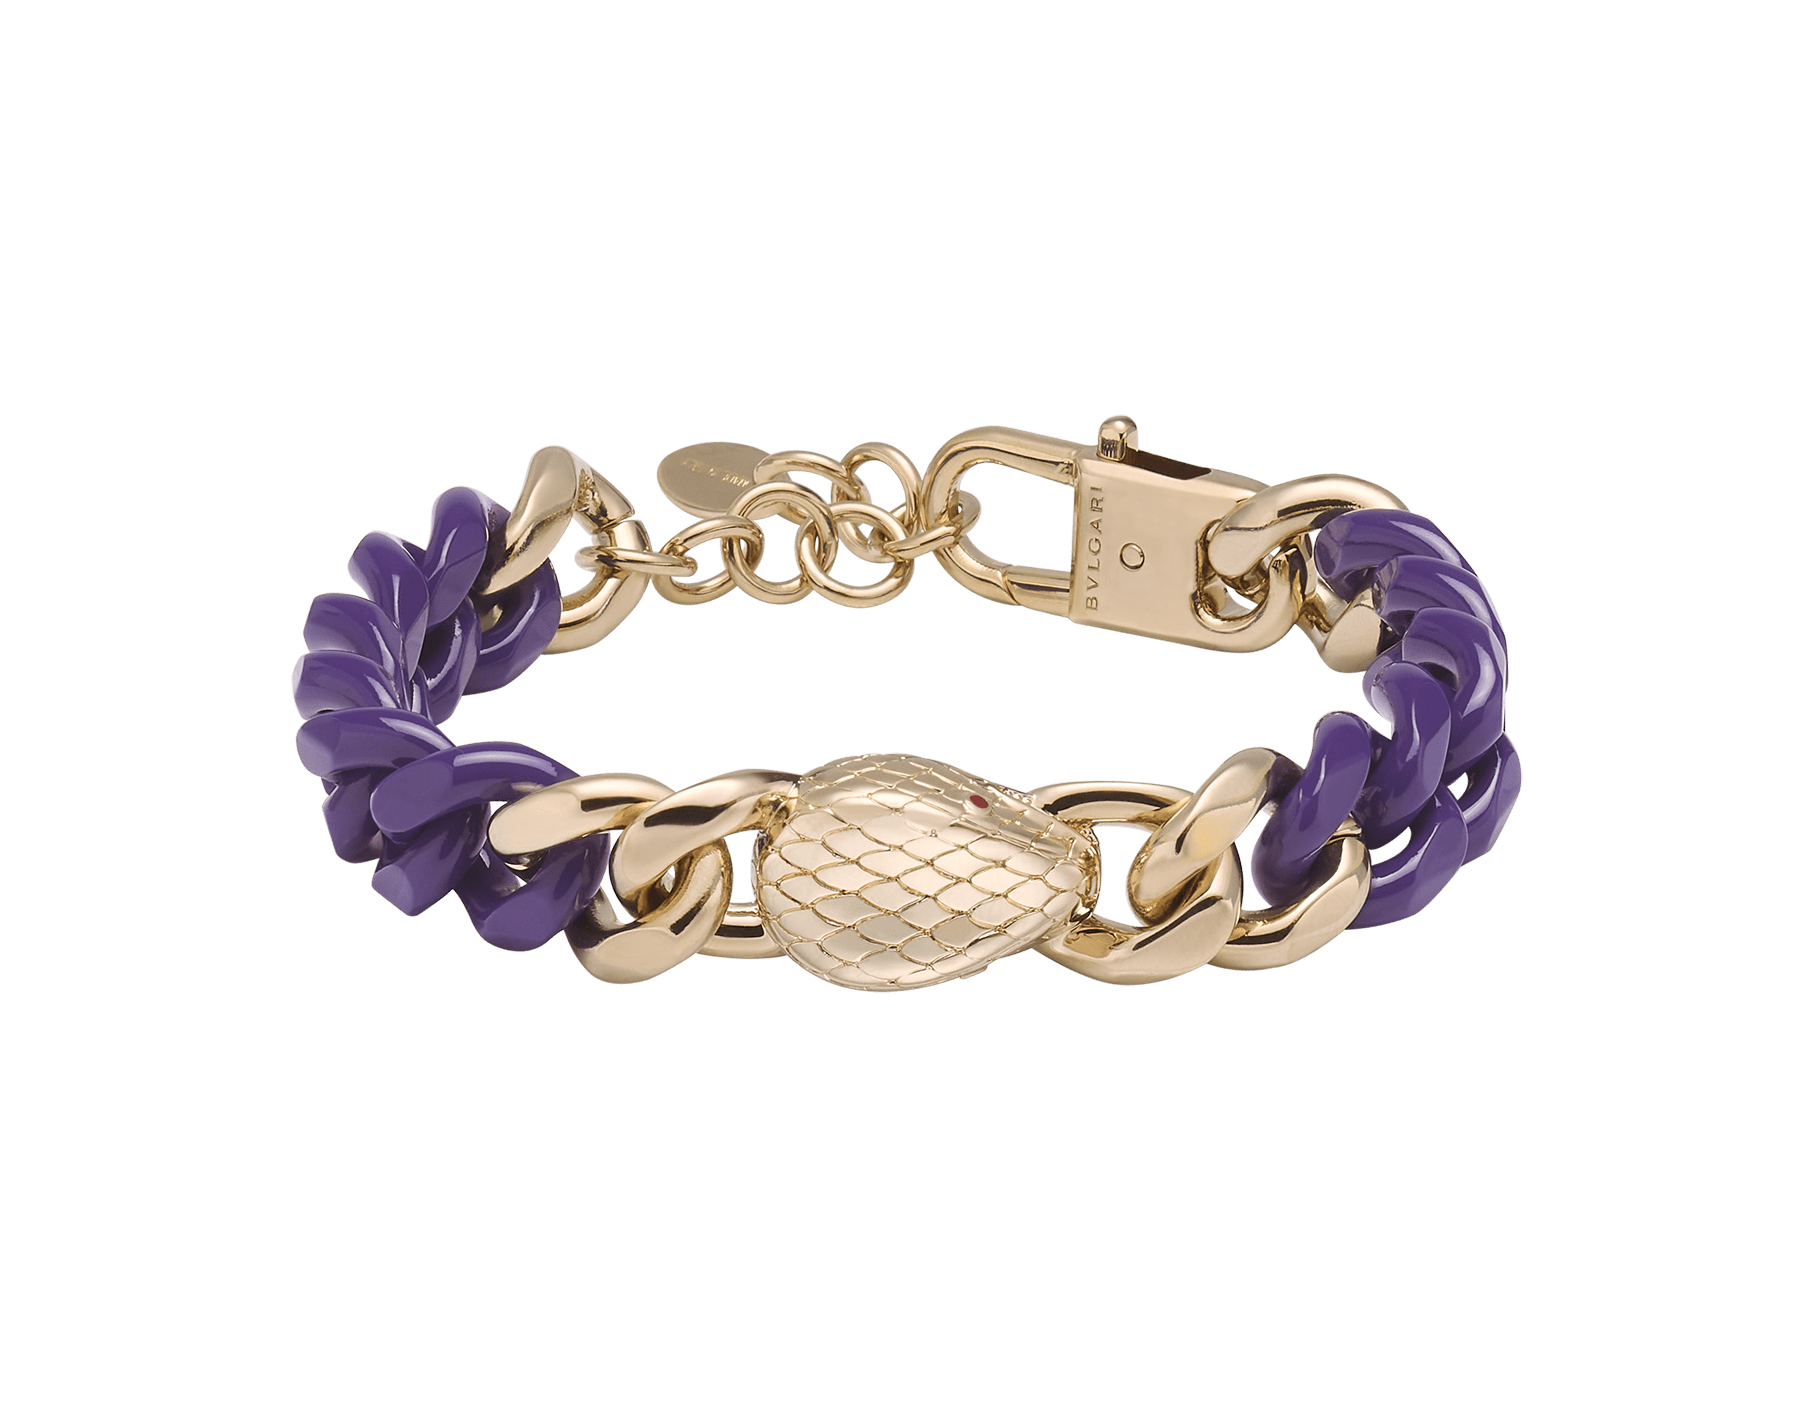 Serpenti Forever Maxi Chain bracelet in light gold-plated brass, with partial emerald green enamel. Captivating snakehead embellishment with red enamel eyes in the middle, and adjustable closure. SERP-CHUNKYCHAINb image 1